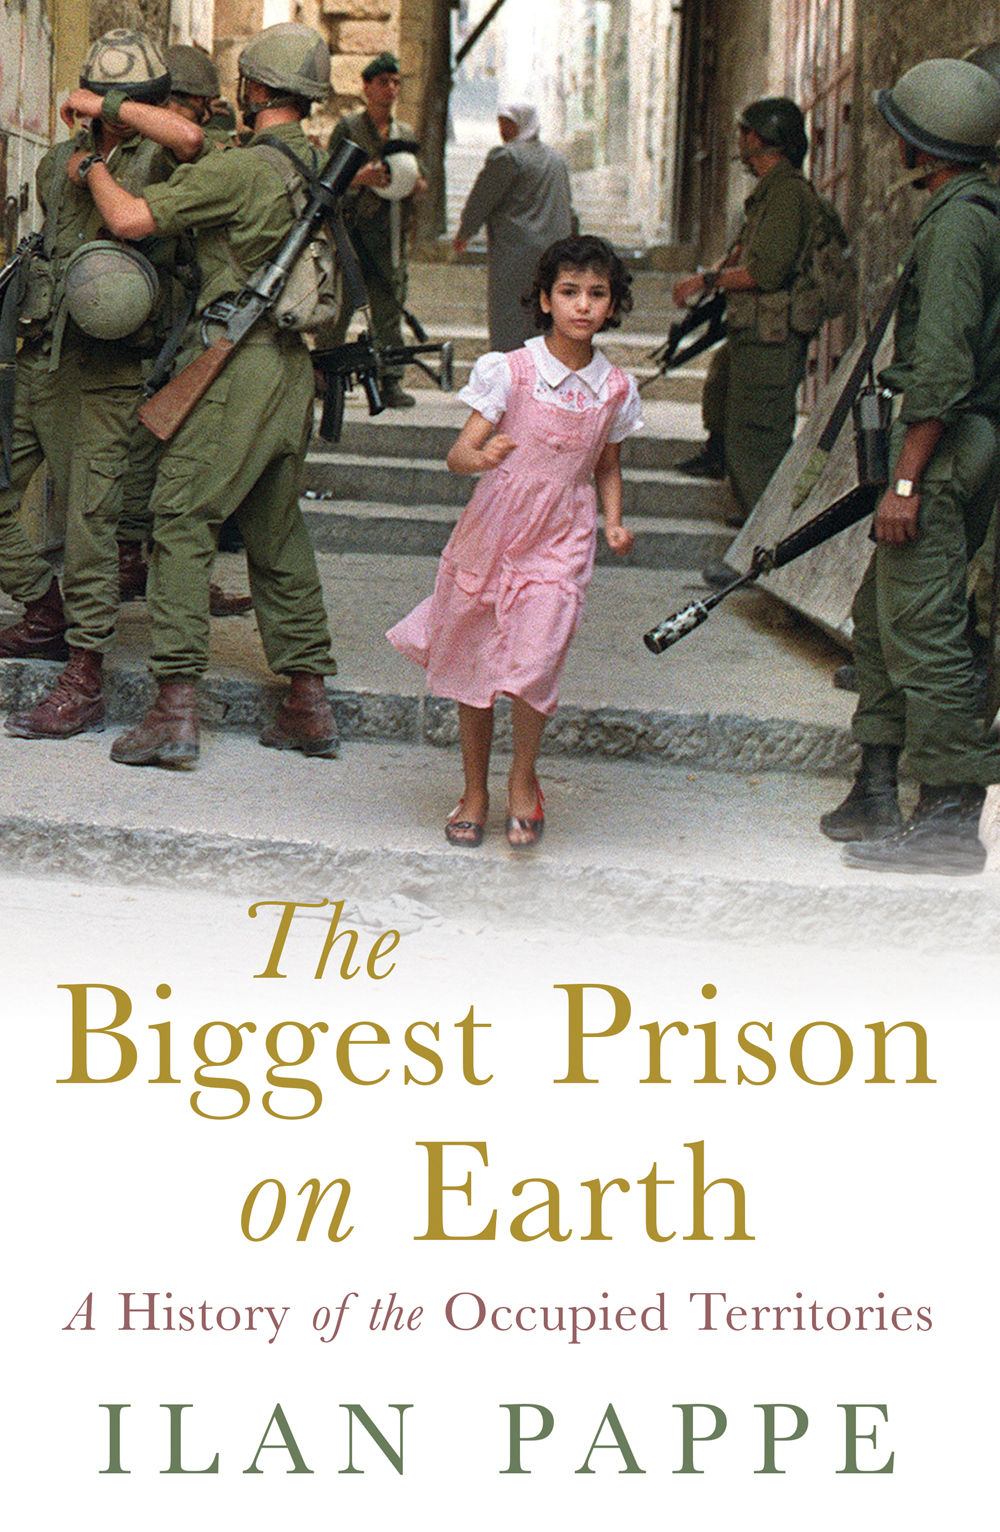 Cover of Pappe's "The Biggest Prison on Earth: A History of the Occupied Territories" (scheduled for publication in August 2017; Oneworld Publications)